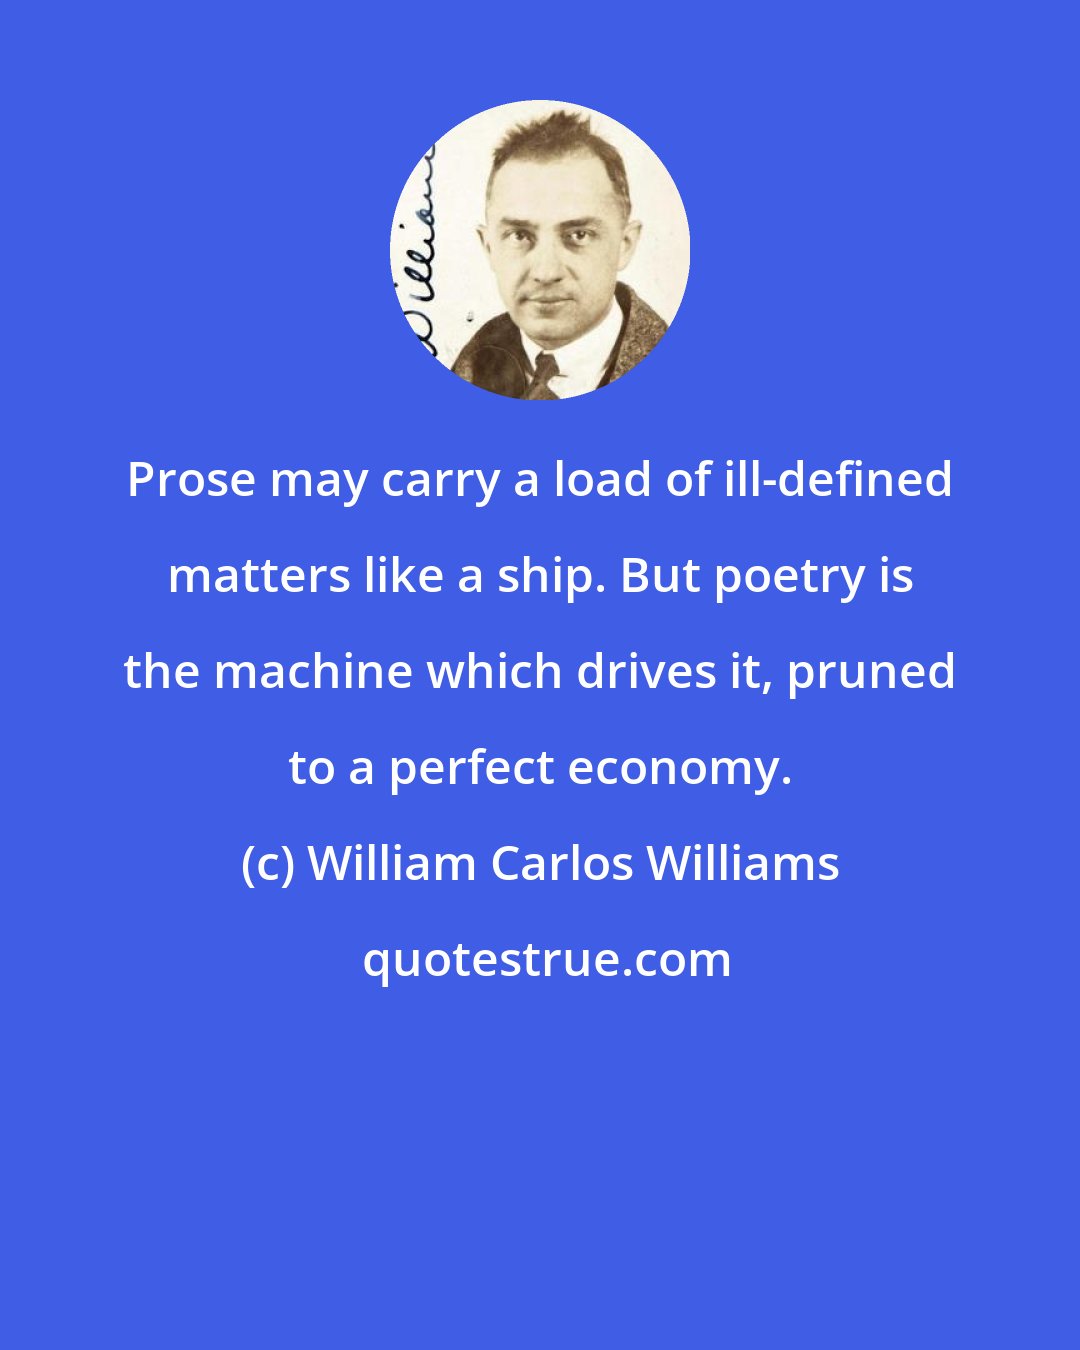 William Carlos Williams: Prose may carry a load of ill-defined matters like a ship. But poetry is the machine which drives it, pruned to a perfect economy.